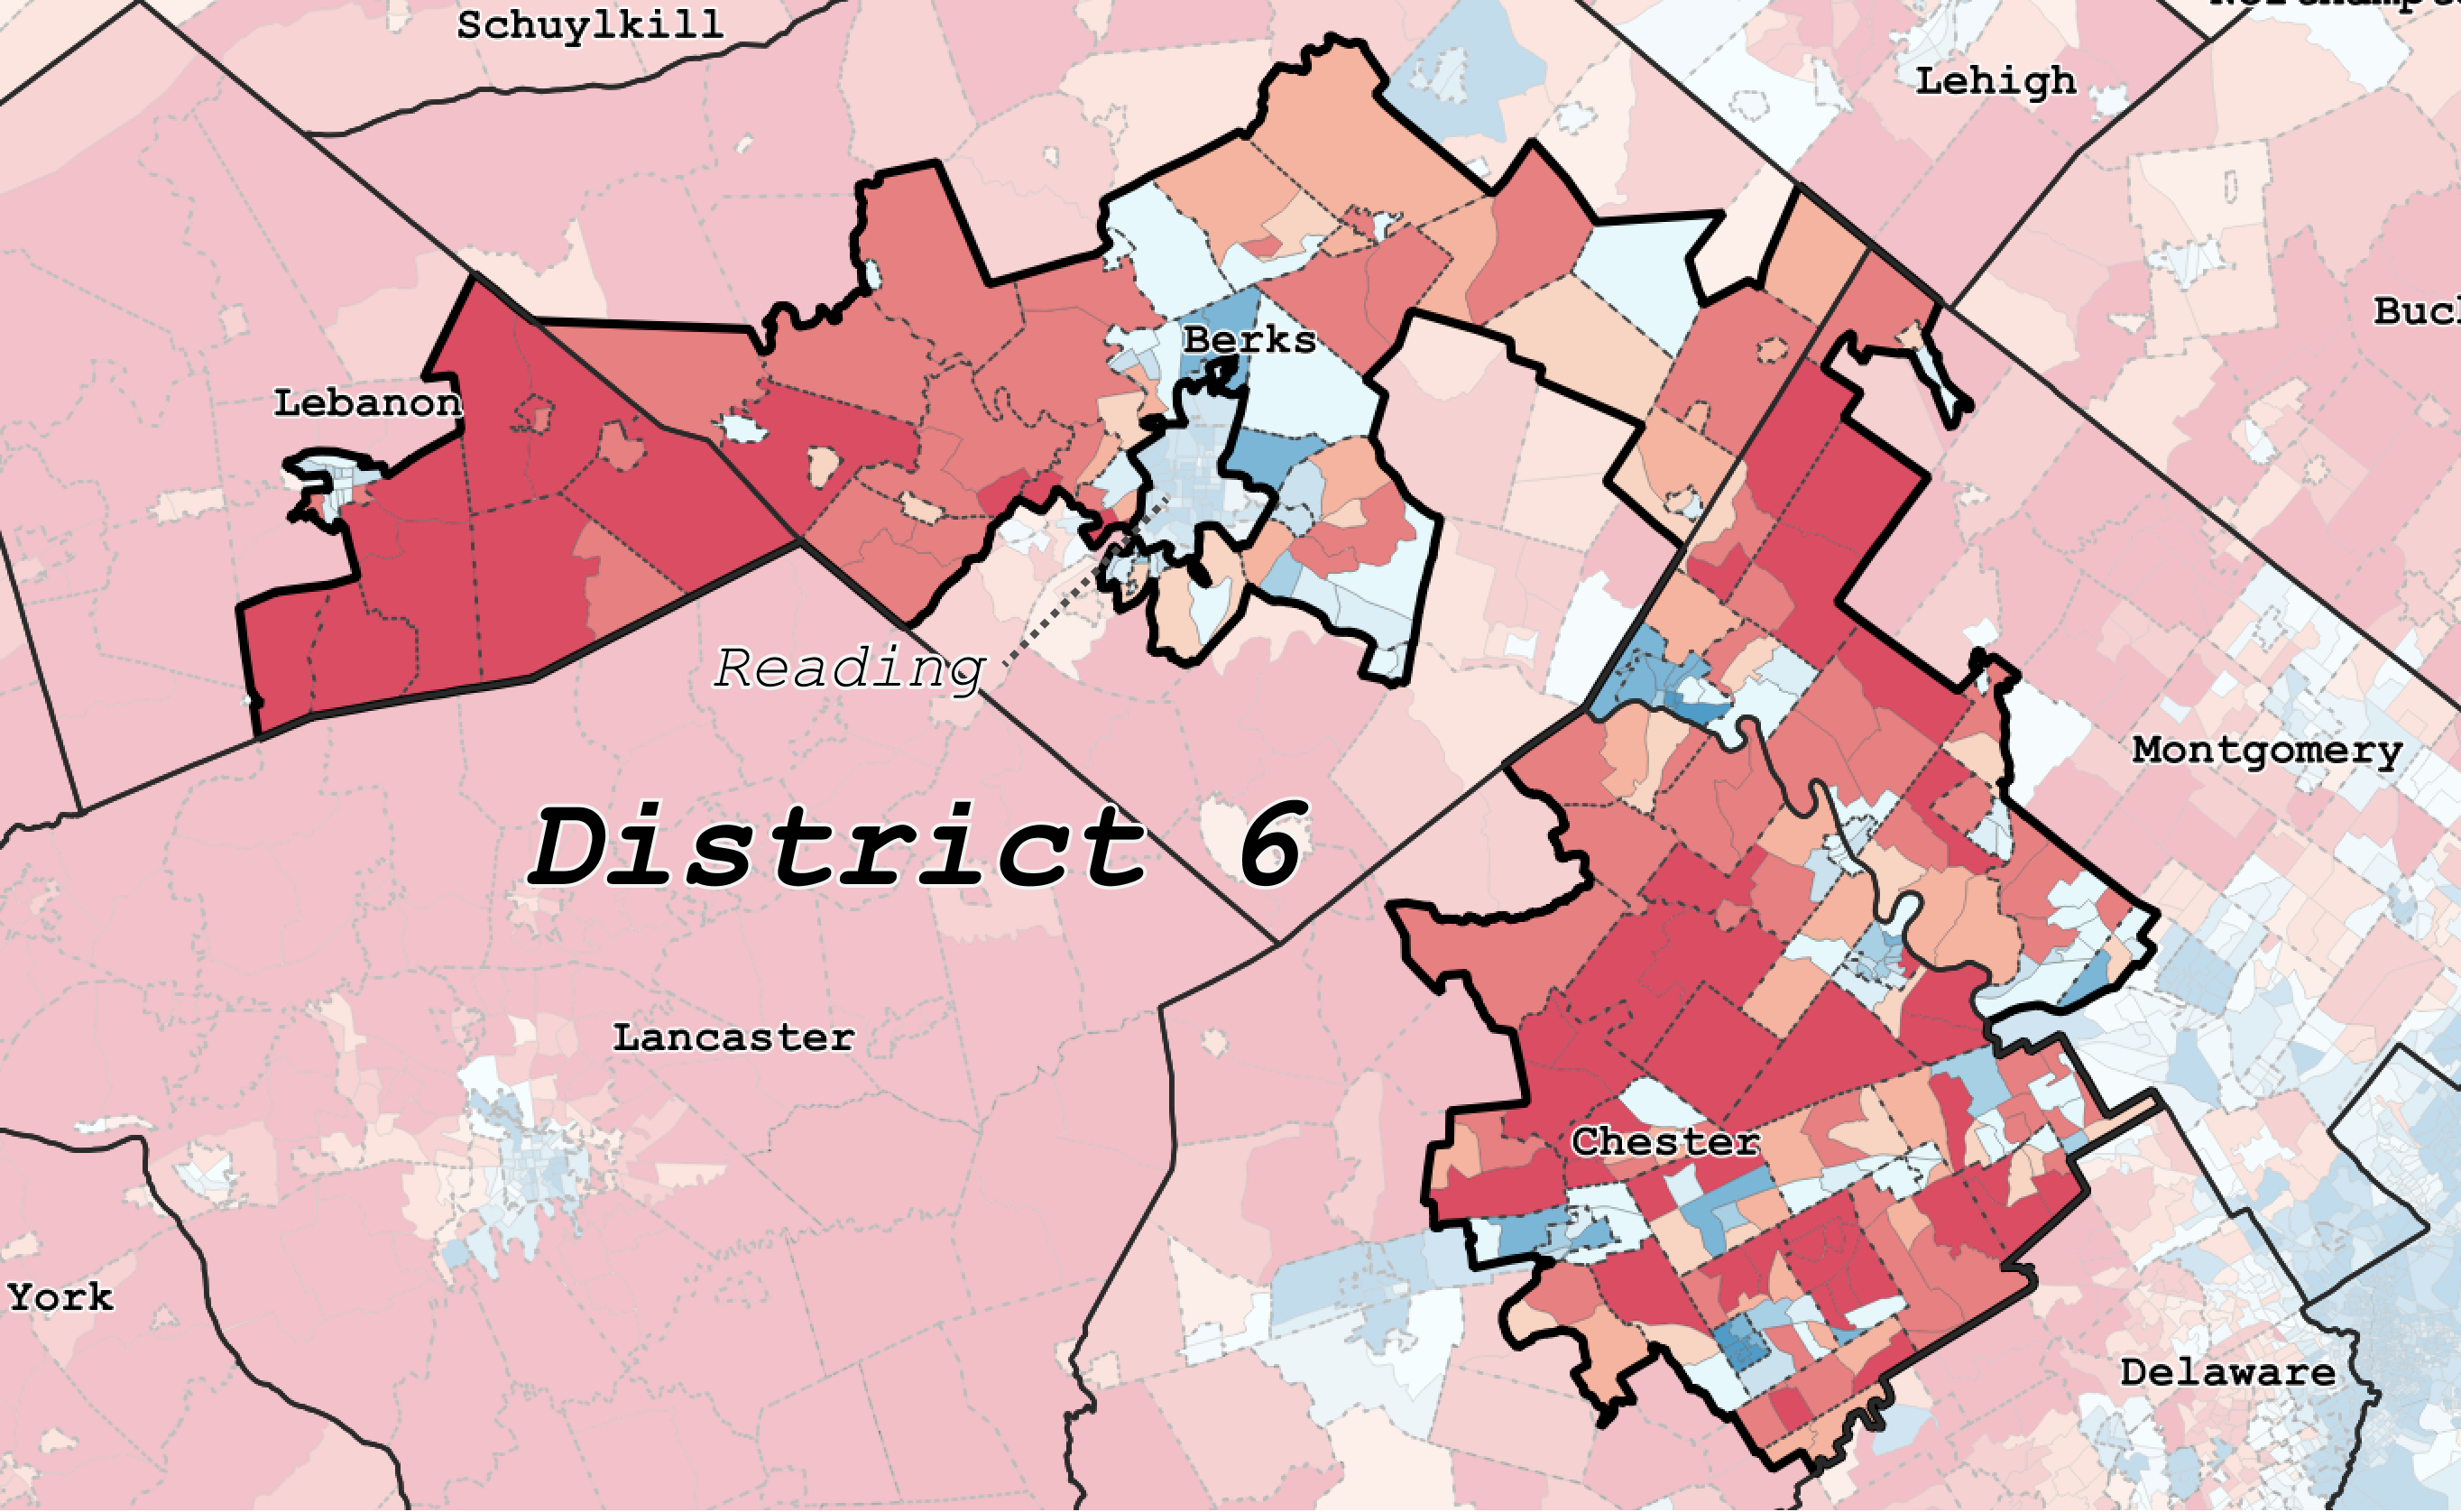 Congressional District 6